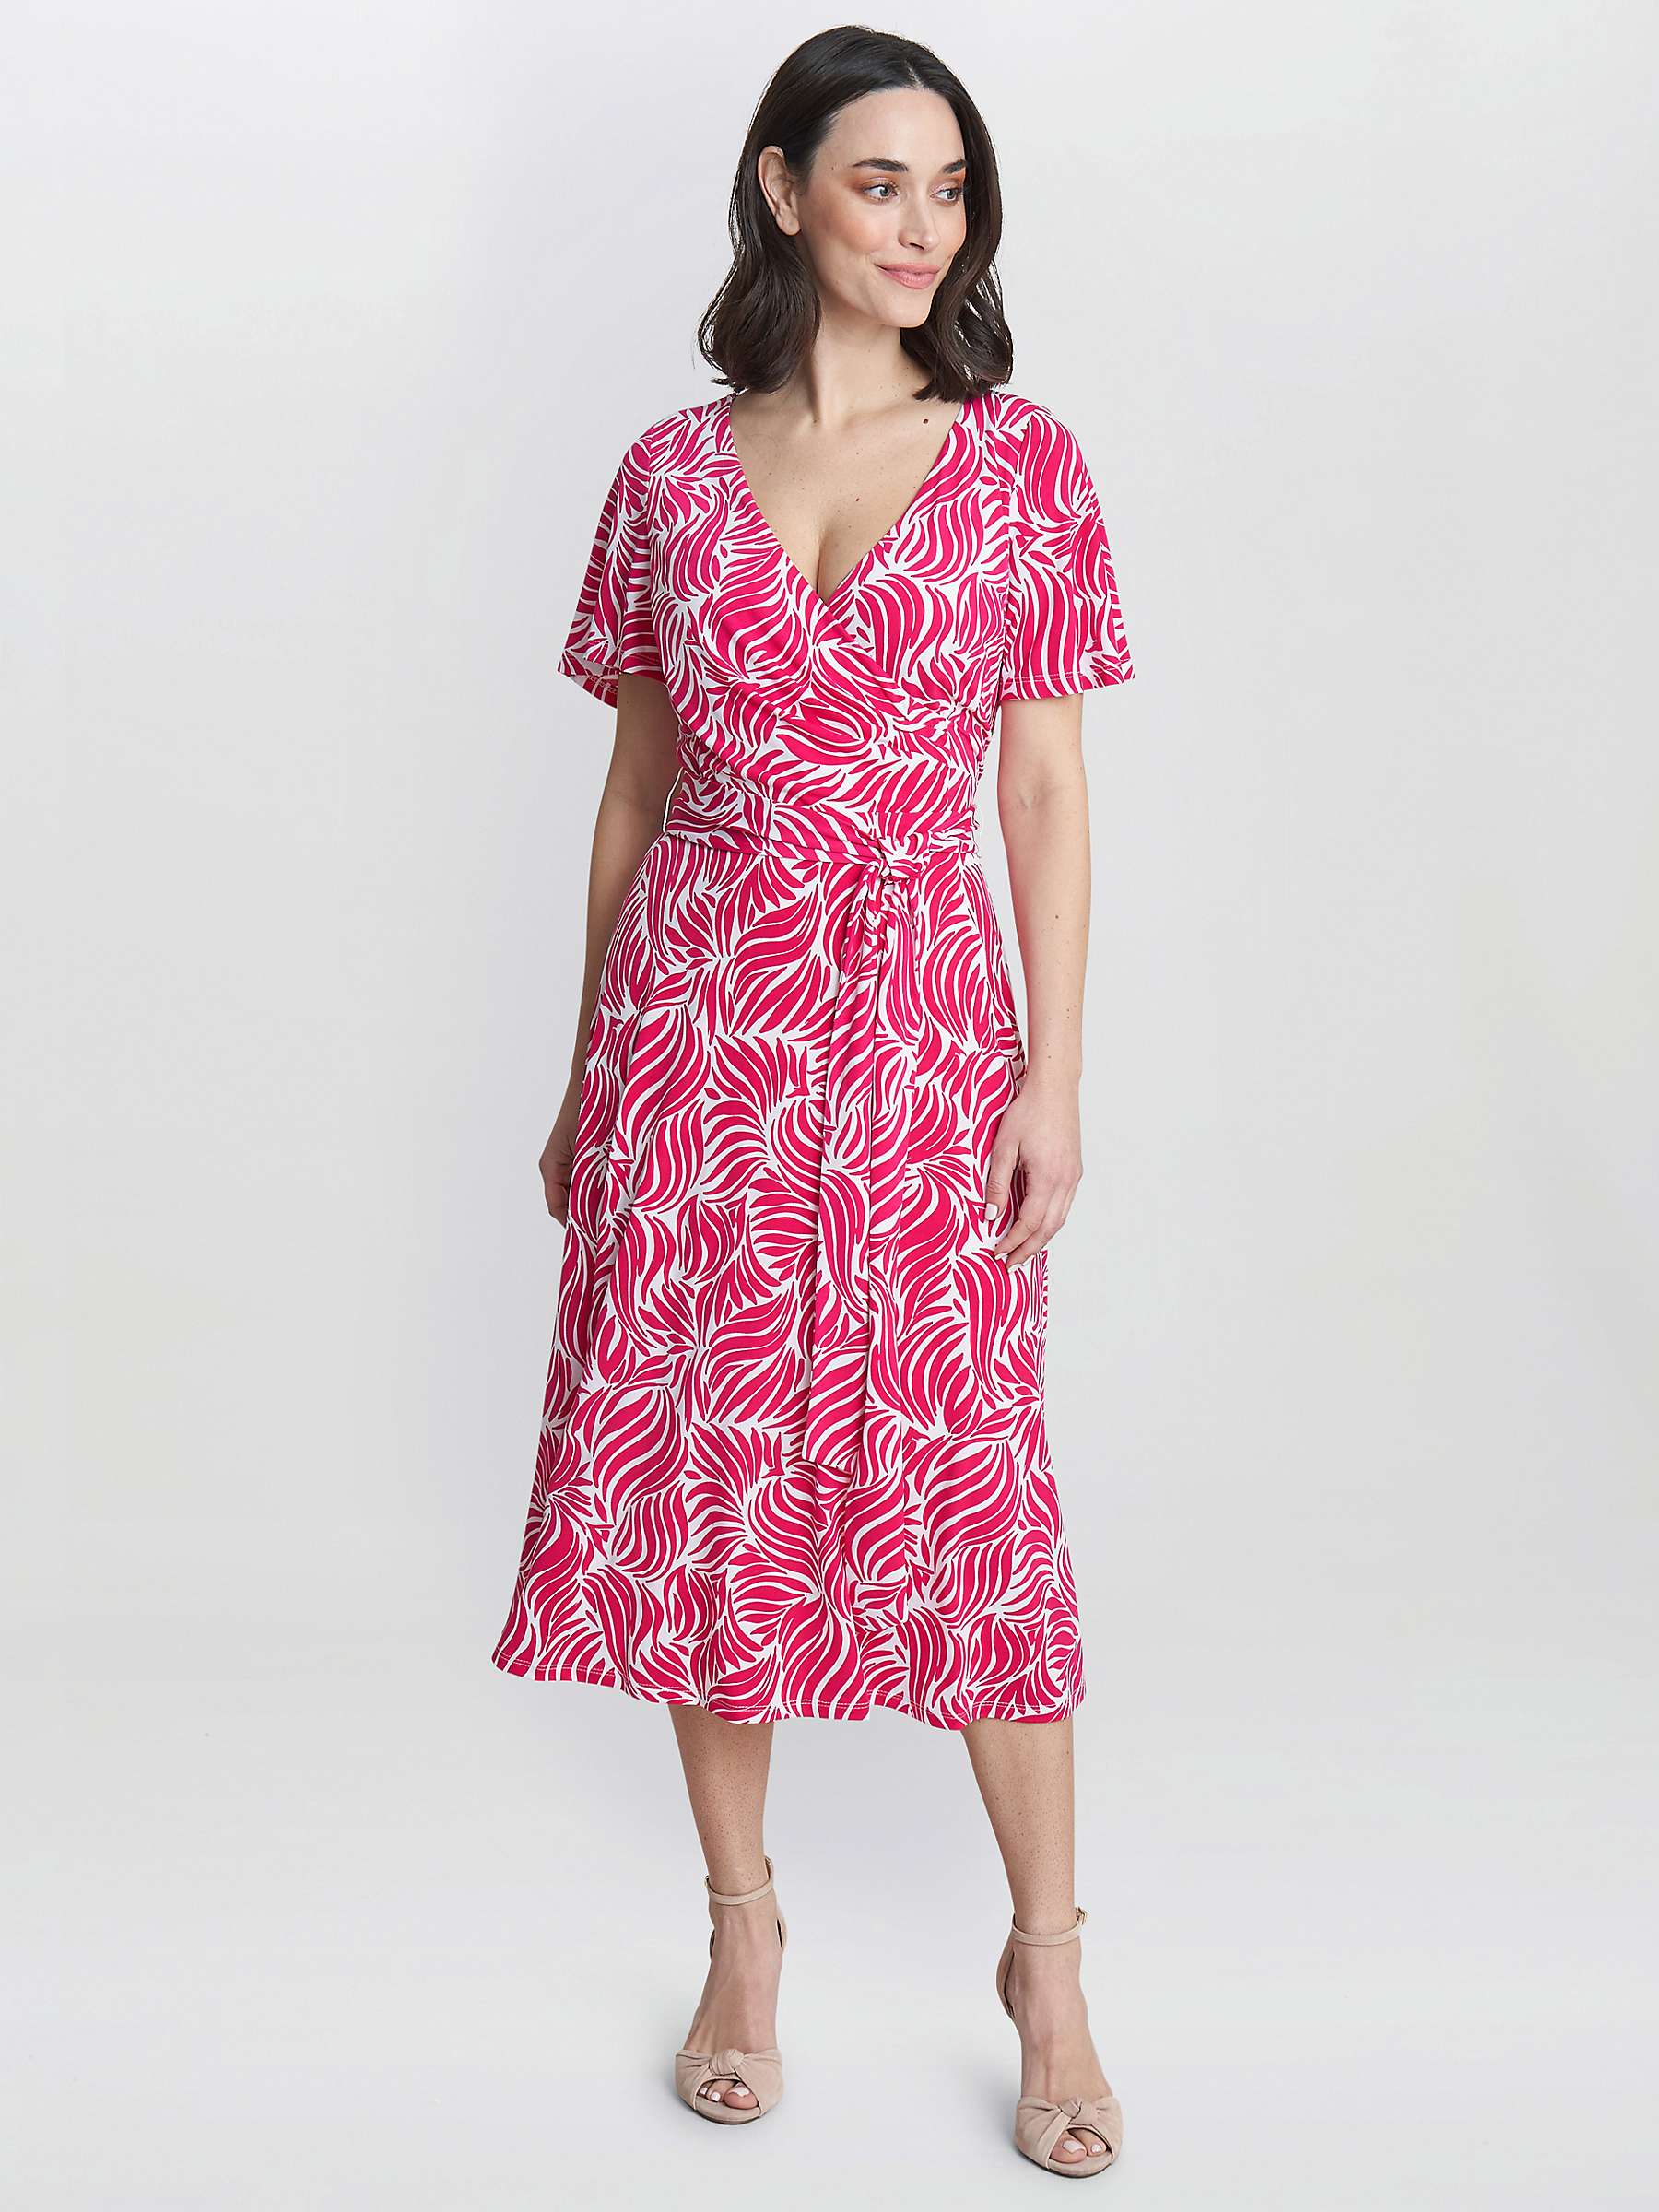 Buy Gina Bacconi Lacey Fit And Flare Dress, Dark Pink/White Online at johnlewis.com